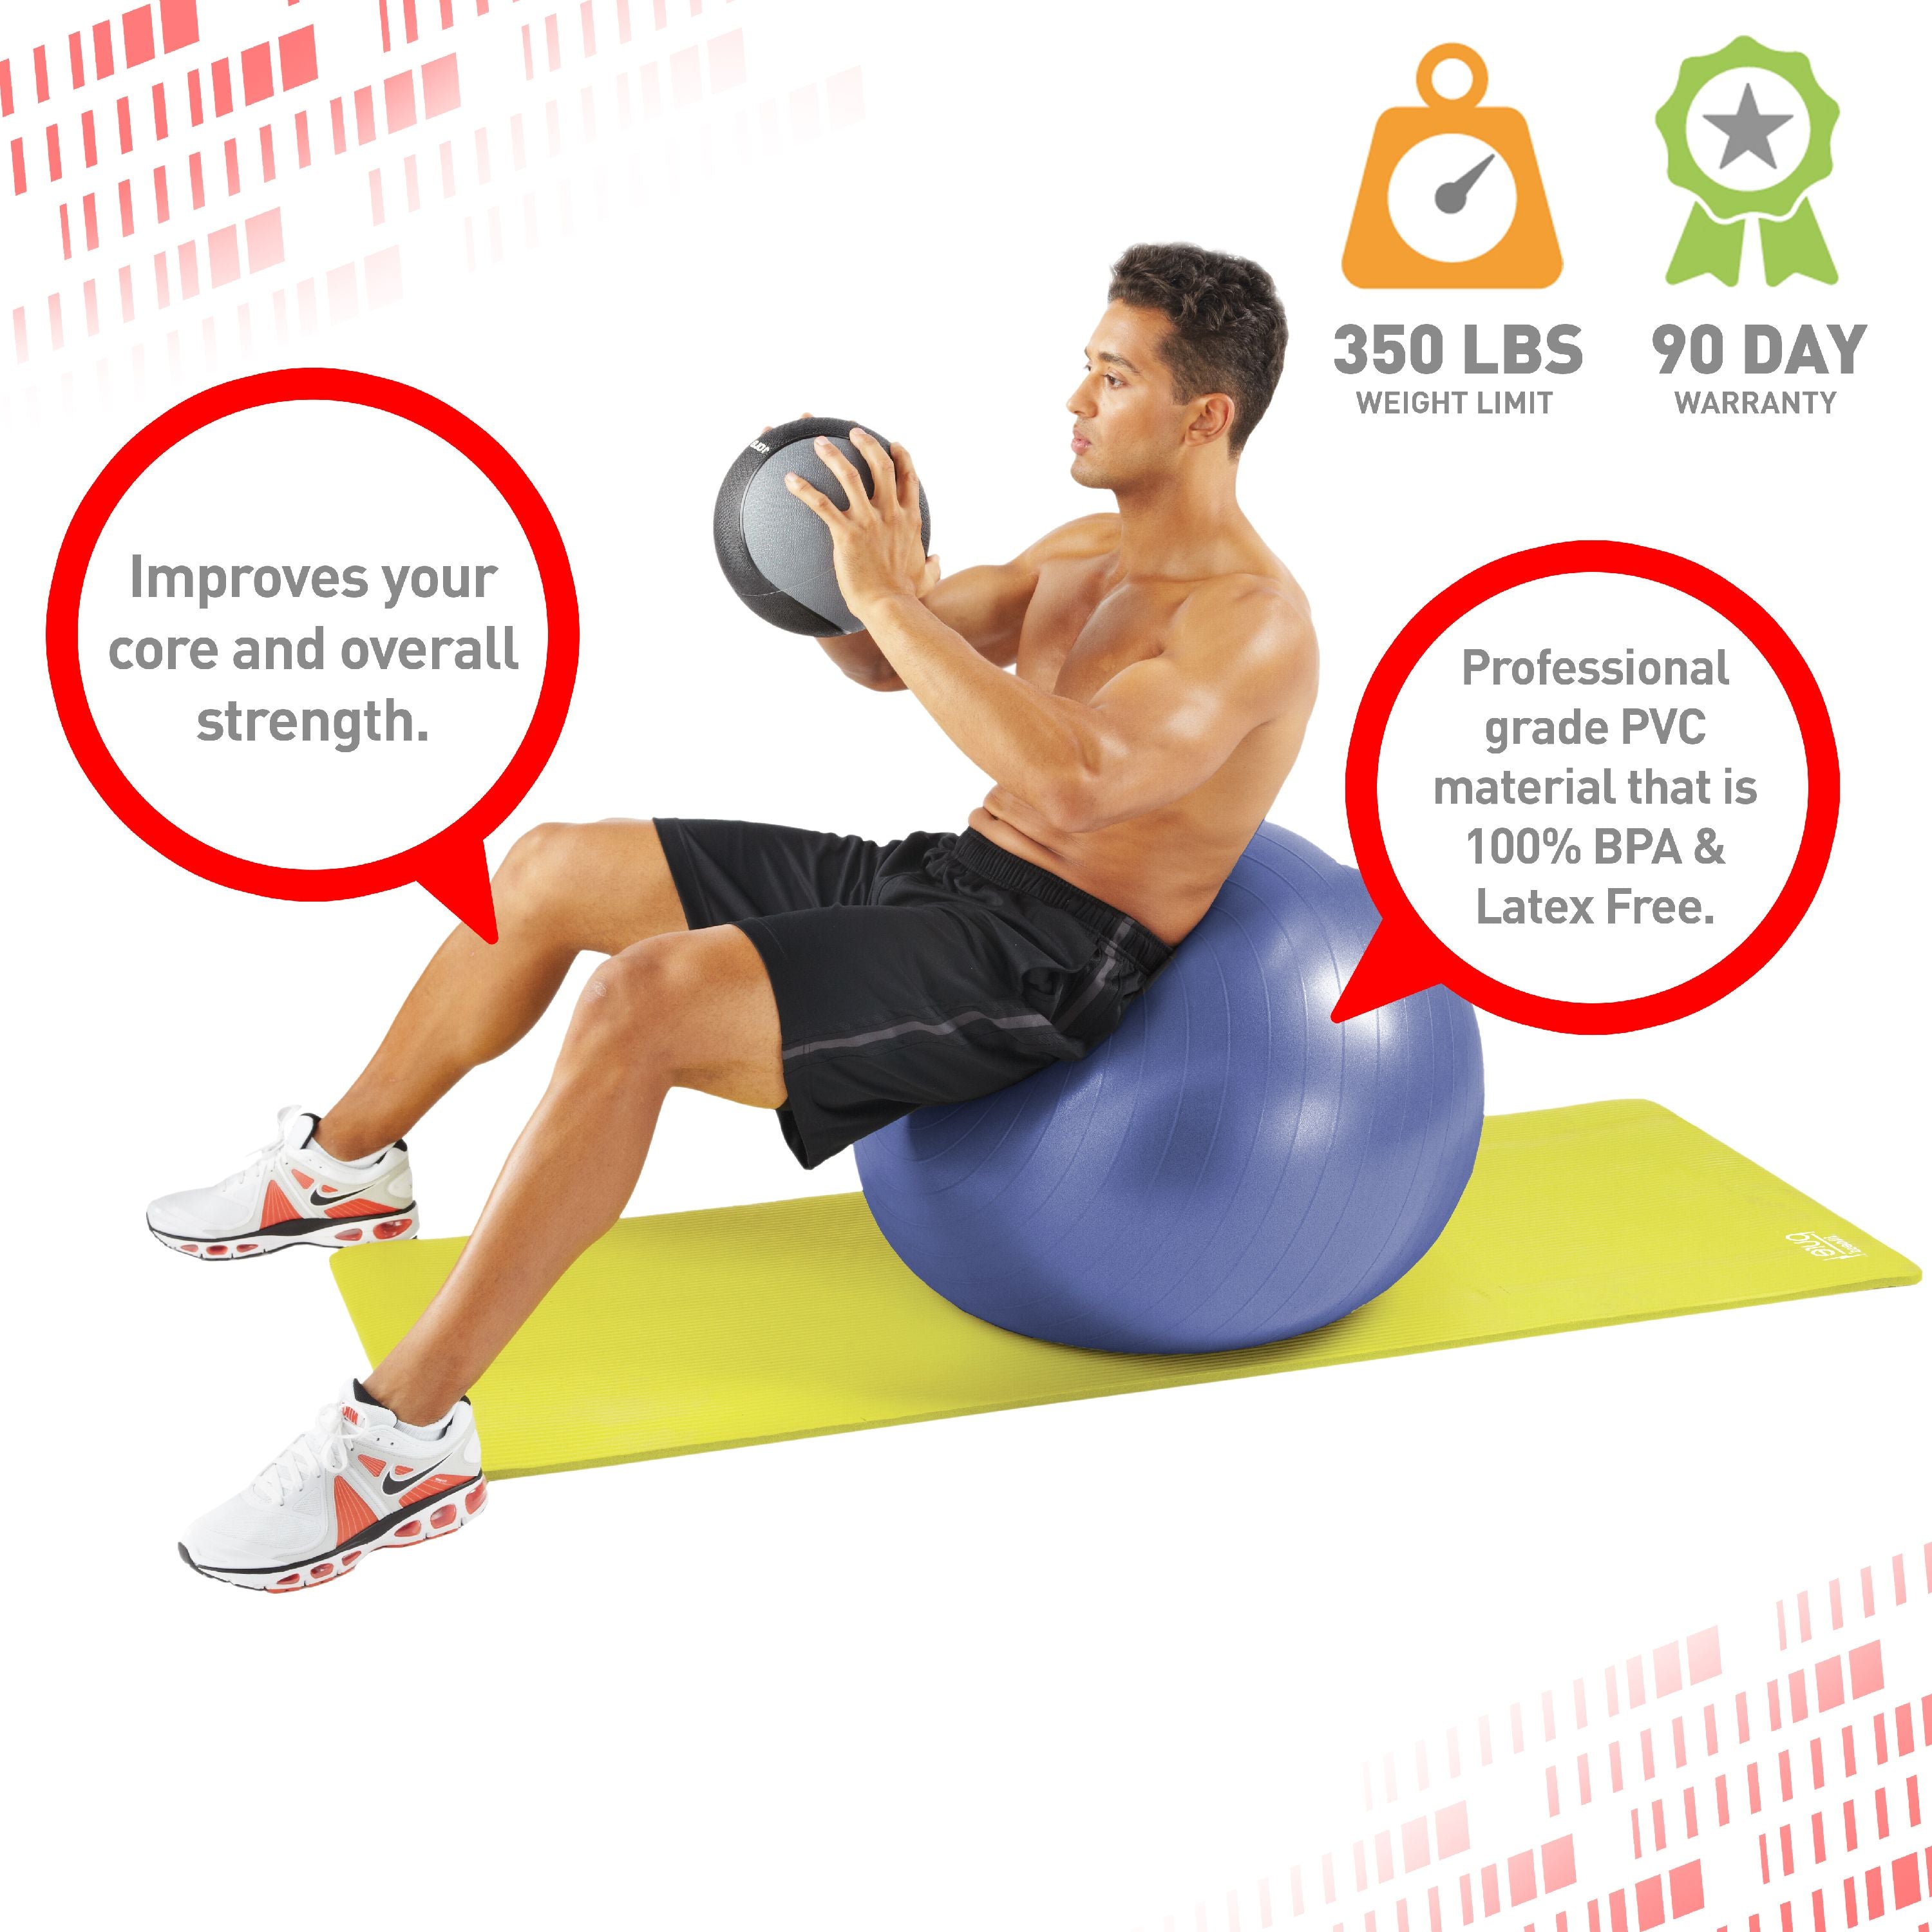 Pure Fitness 65cm Professional Anti-Burst Stability Ball, 350lb Weight Limit, 2 Pack